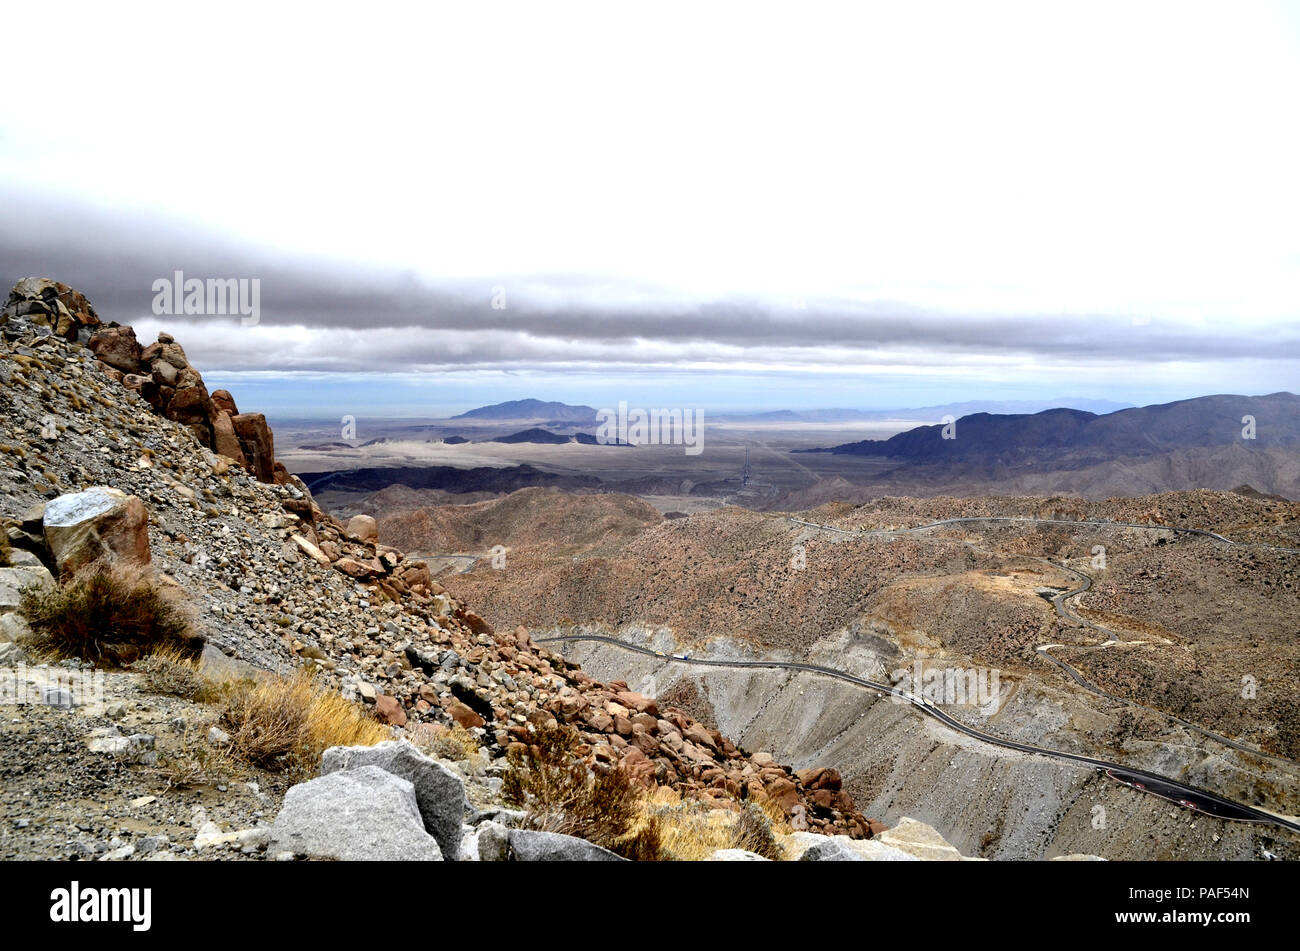 View of the Mexicali Valley and El Centinela (Mt. Signal) from the Tijuana-Mexicali Highway near in La Rumorosa, Baja California, Mexico. Stock Photo